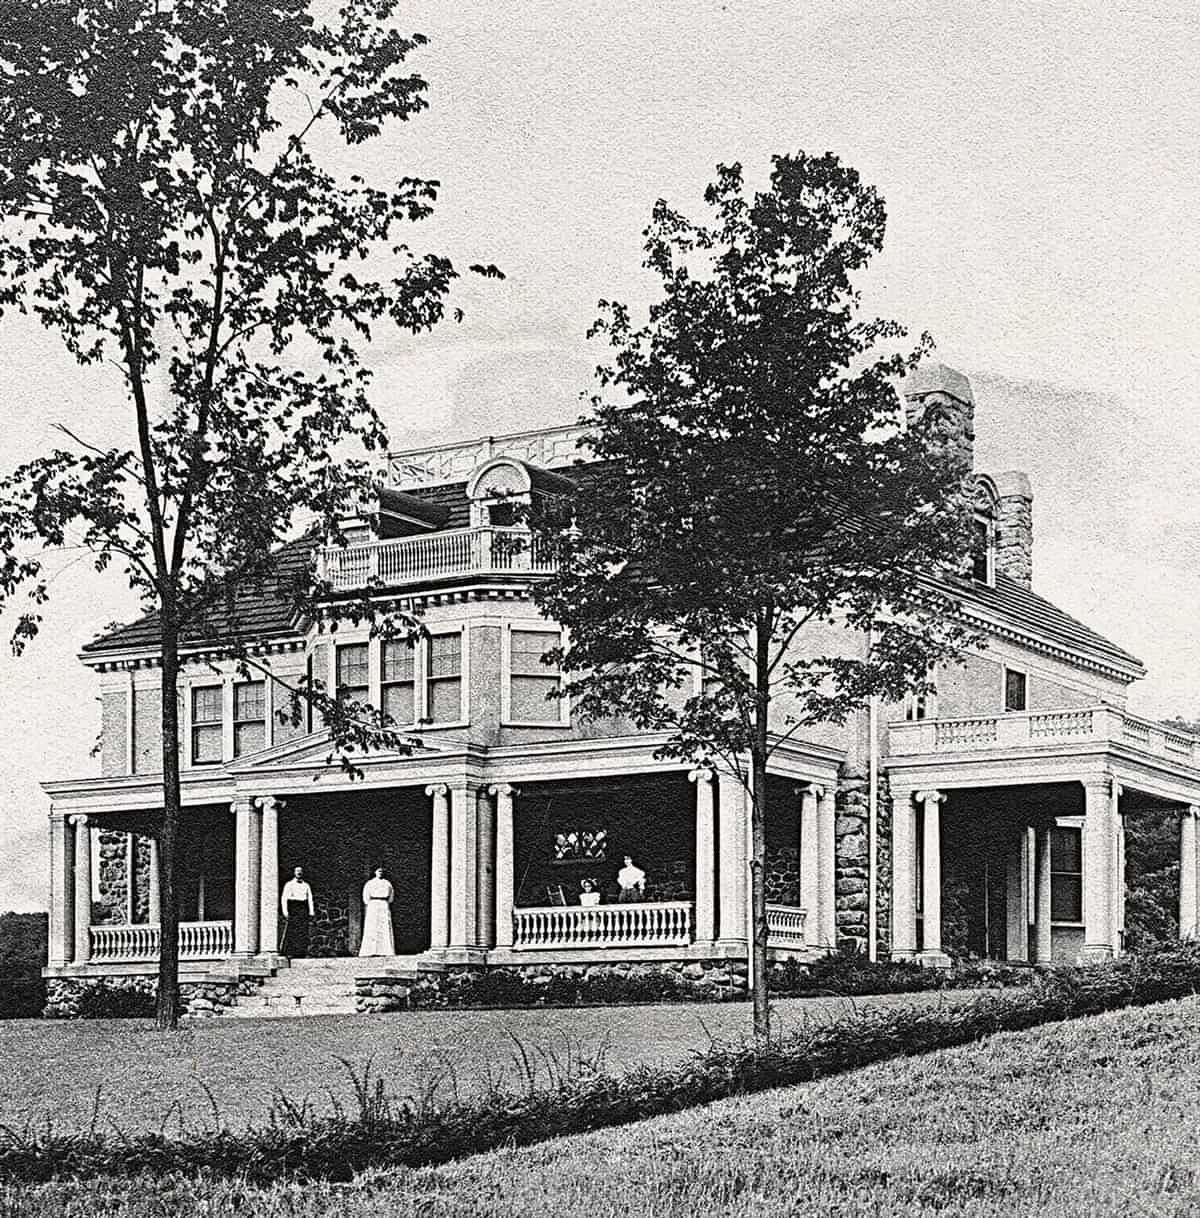 black and white photo of the Hudson Farm in its earlier days